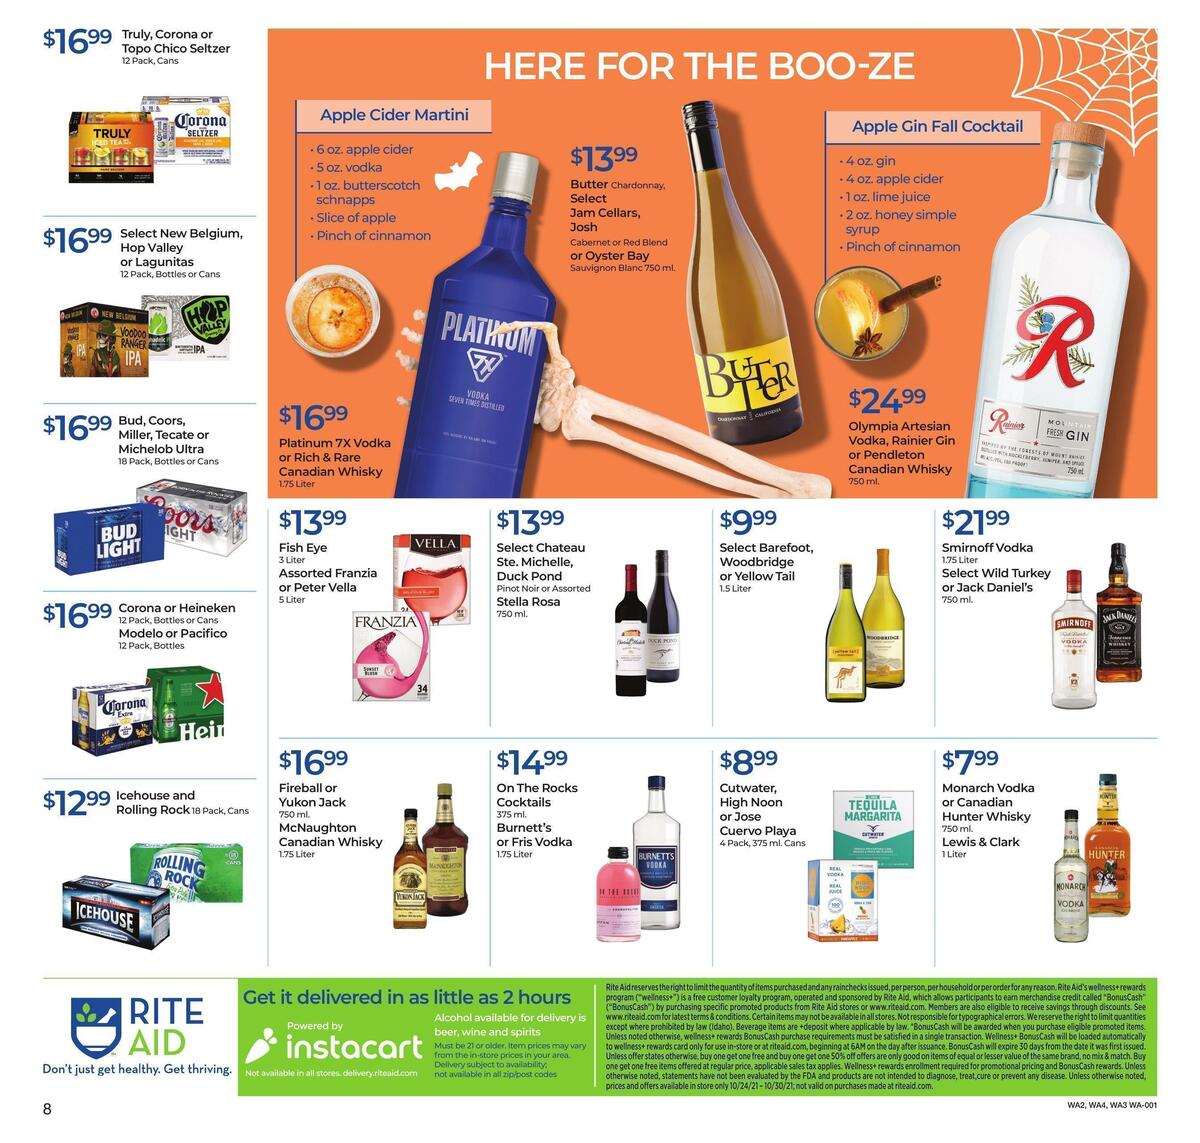 Rite Aid Weekly Ad from October 24